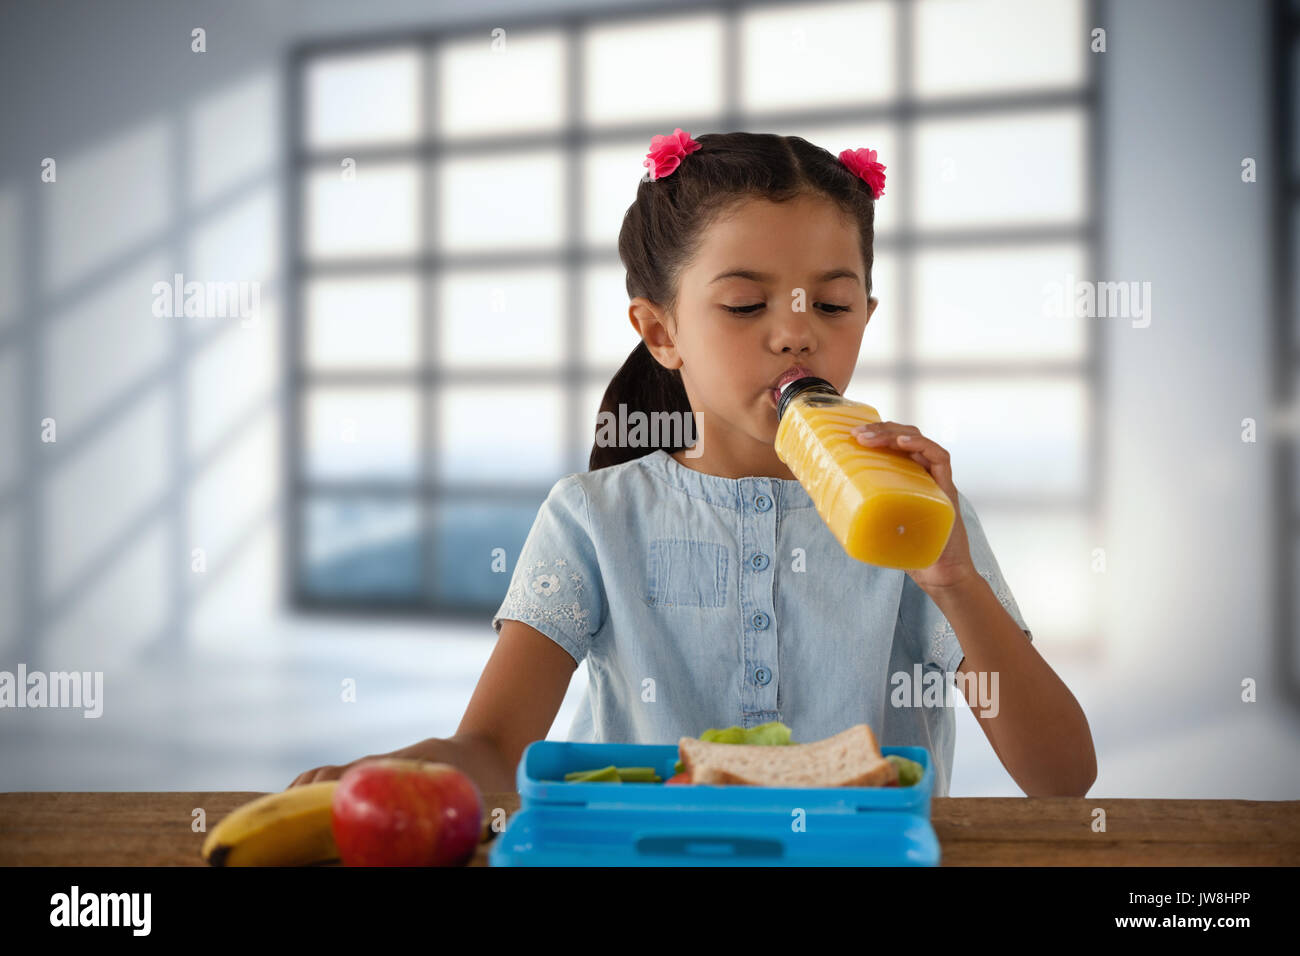 Girl drinking juice at table against room with large windows showing city Stock Photo